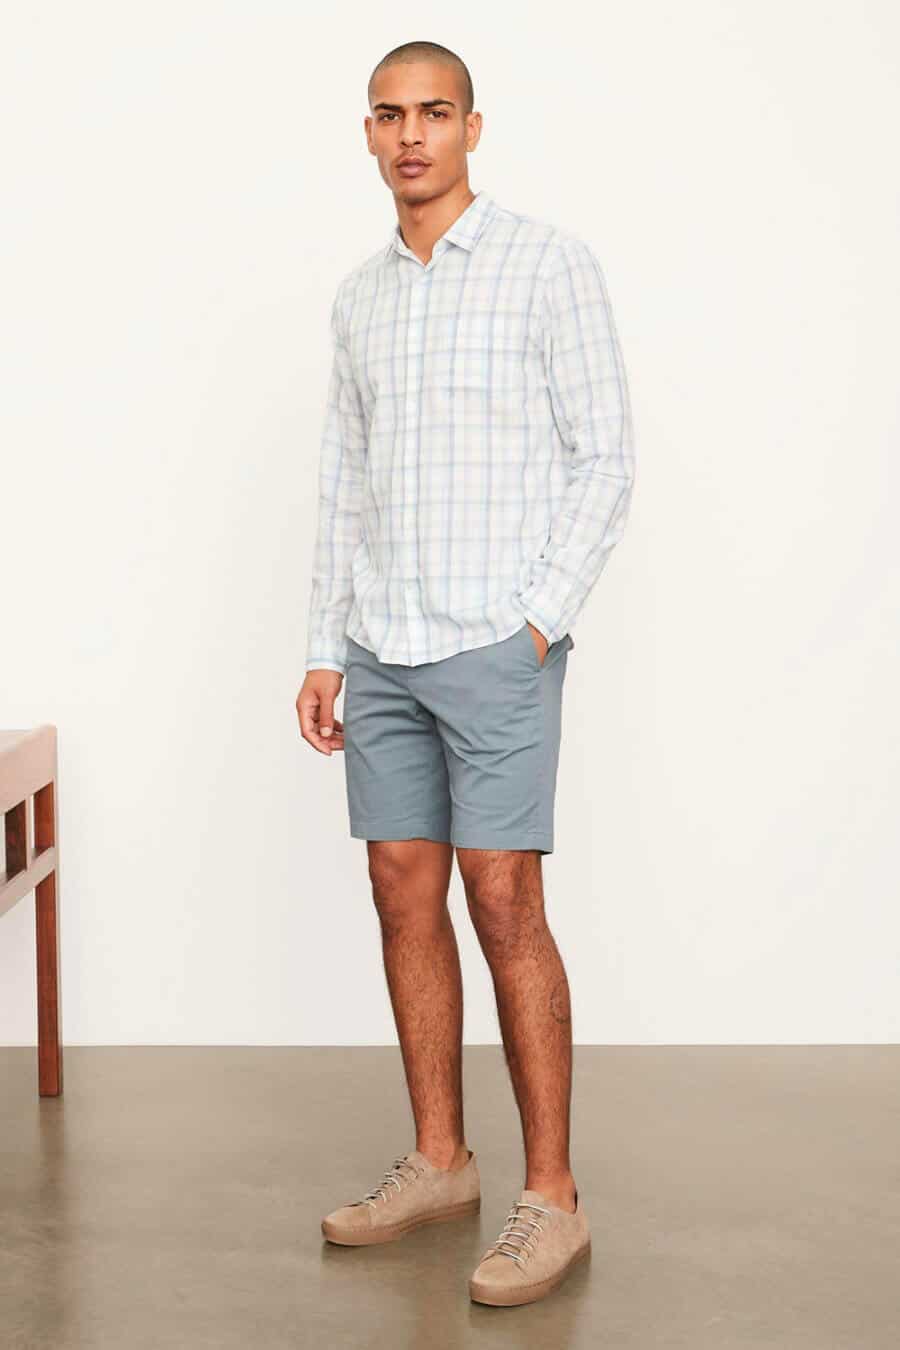 Men's checked linen shirt with shorts and sneakers outfit